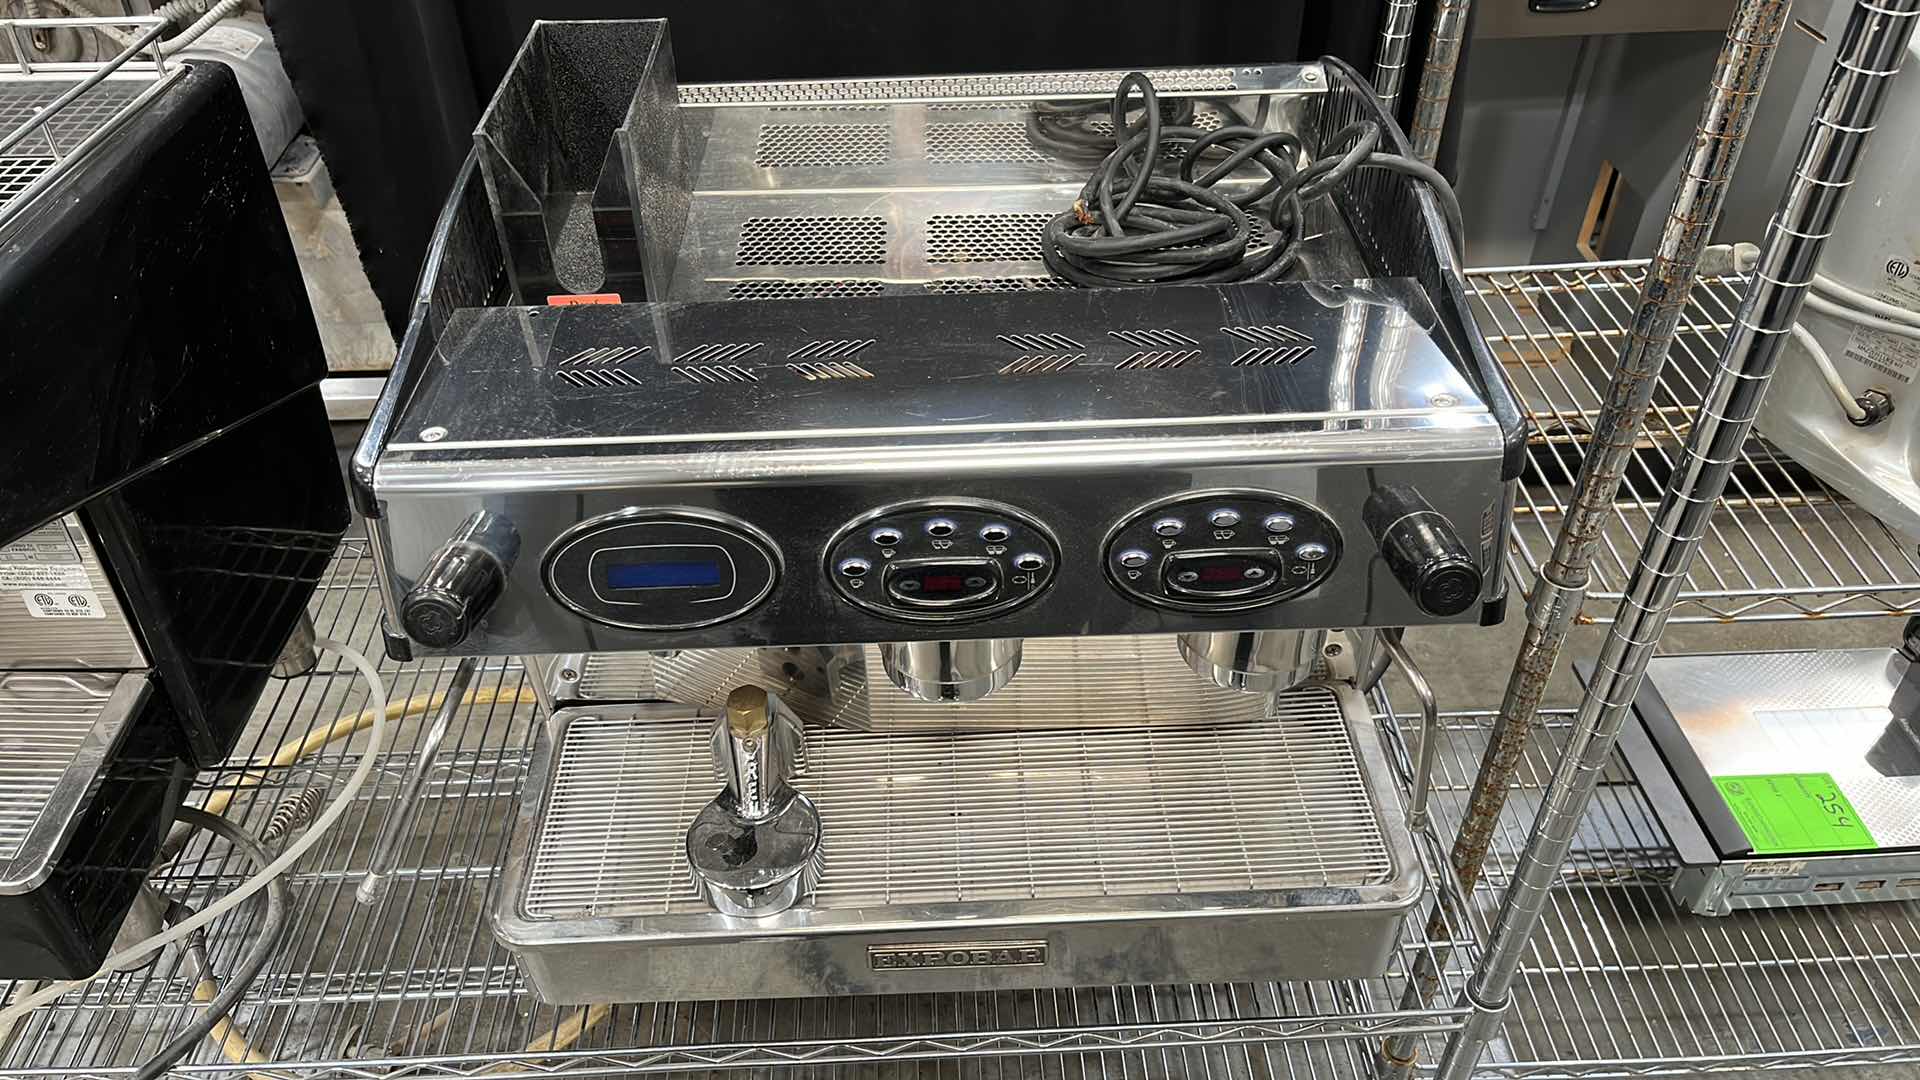 Photo 2 of EXPOBAR MULTI BOILER COMMERCIAL COFFEE MACHINE
20.5” X 27” H 21” (ESPRESSO PORTAFILTER IS NOT INCLUDED)